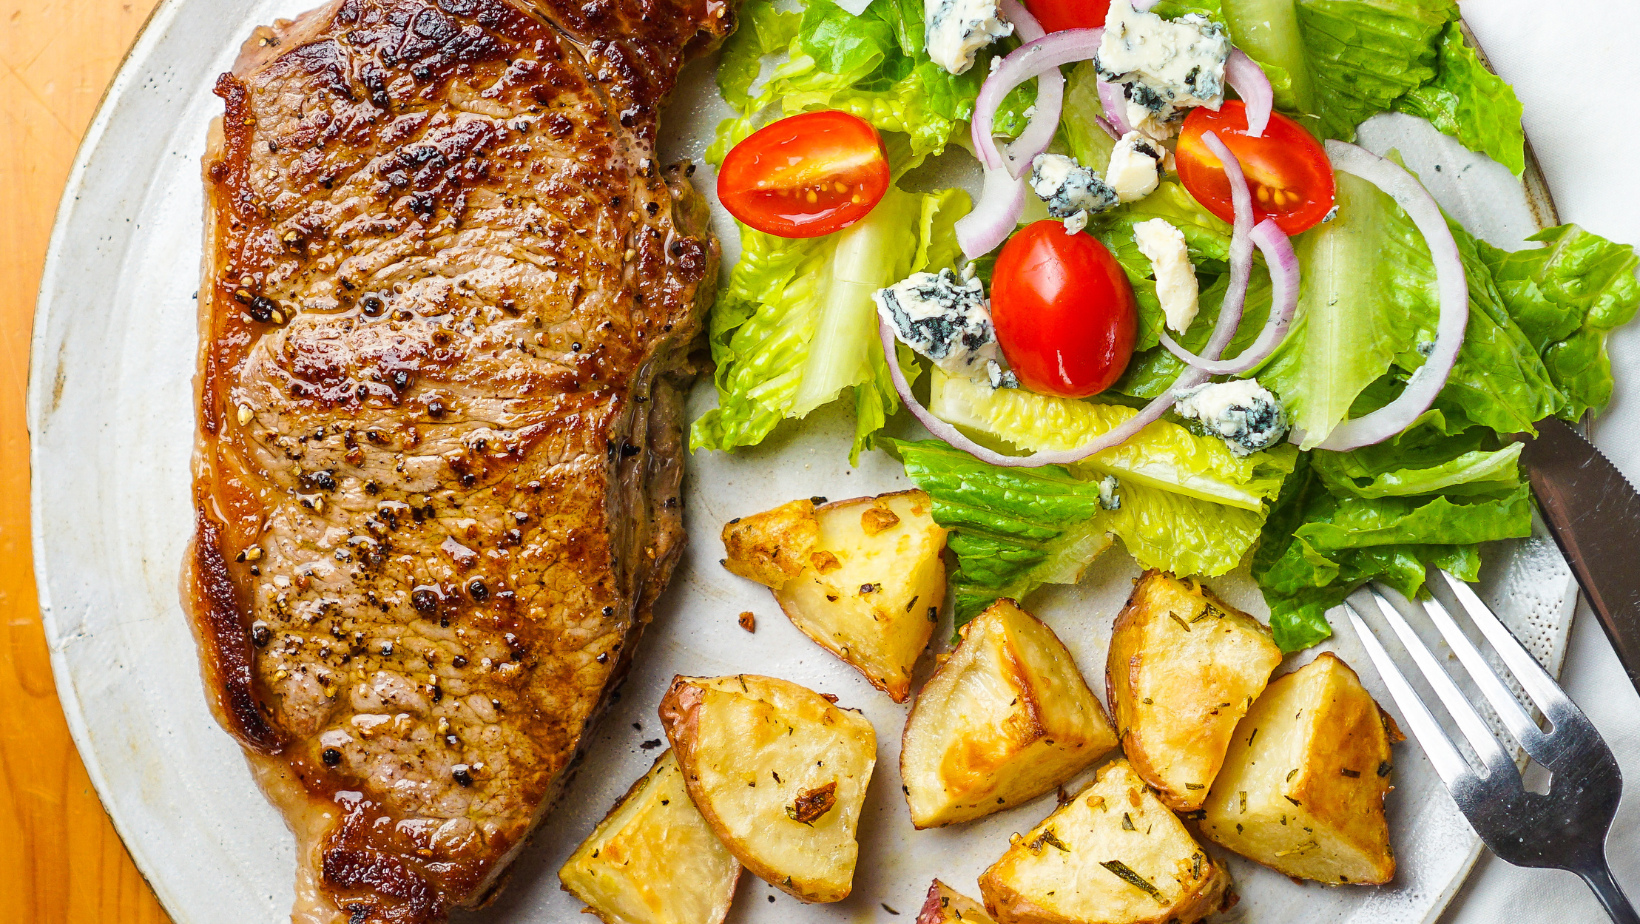 Delectable pork chop dinner with a side salad and roasted potatoes